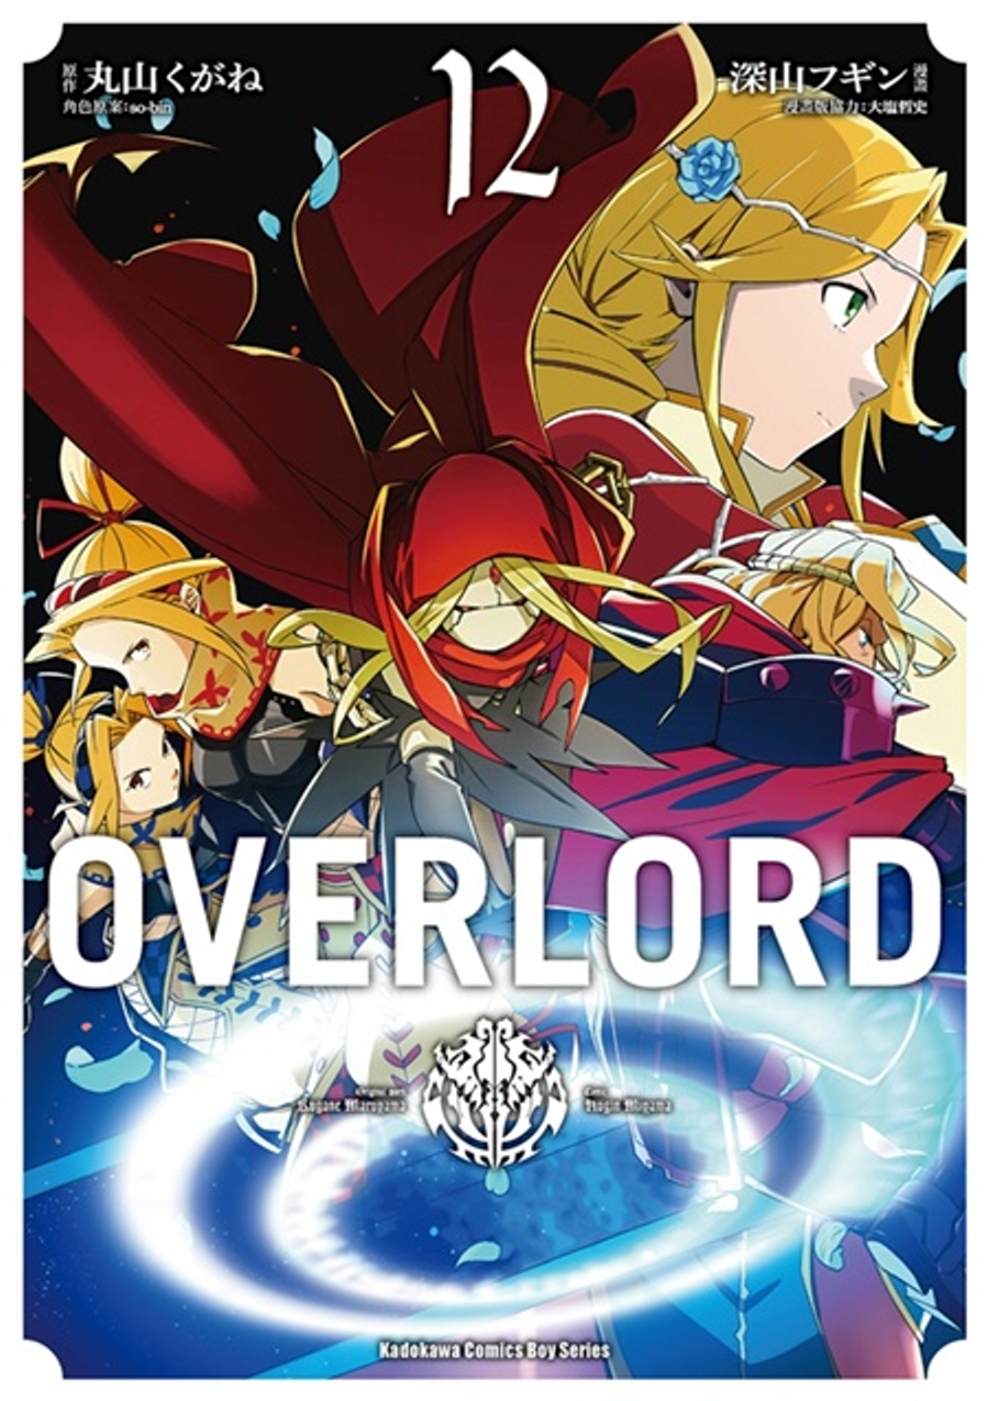 OVERLORD...